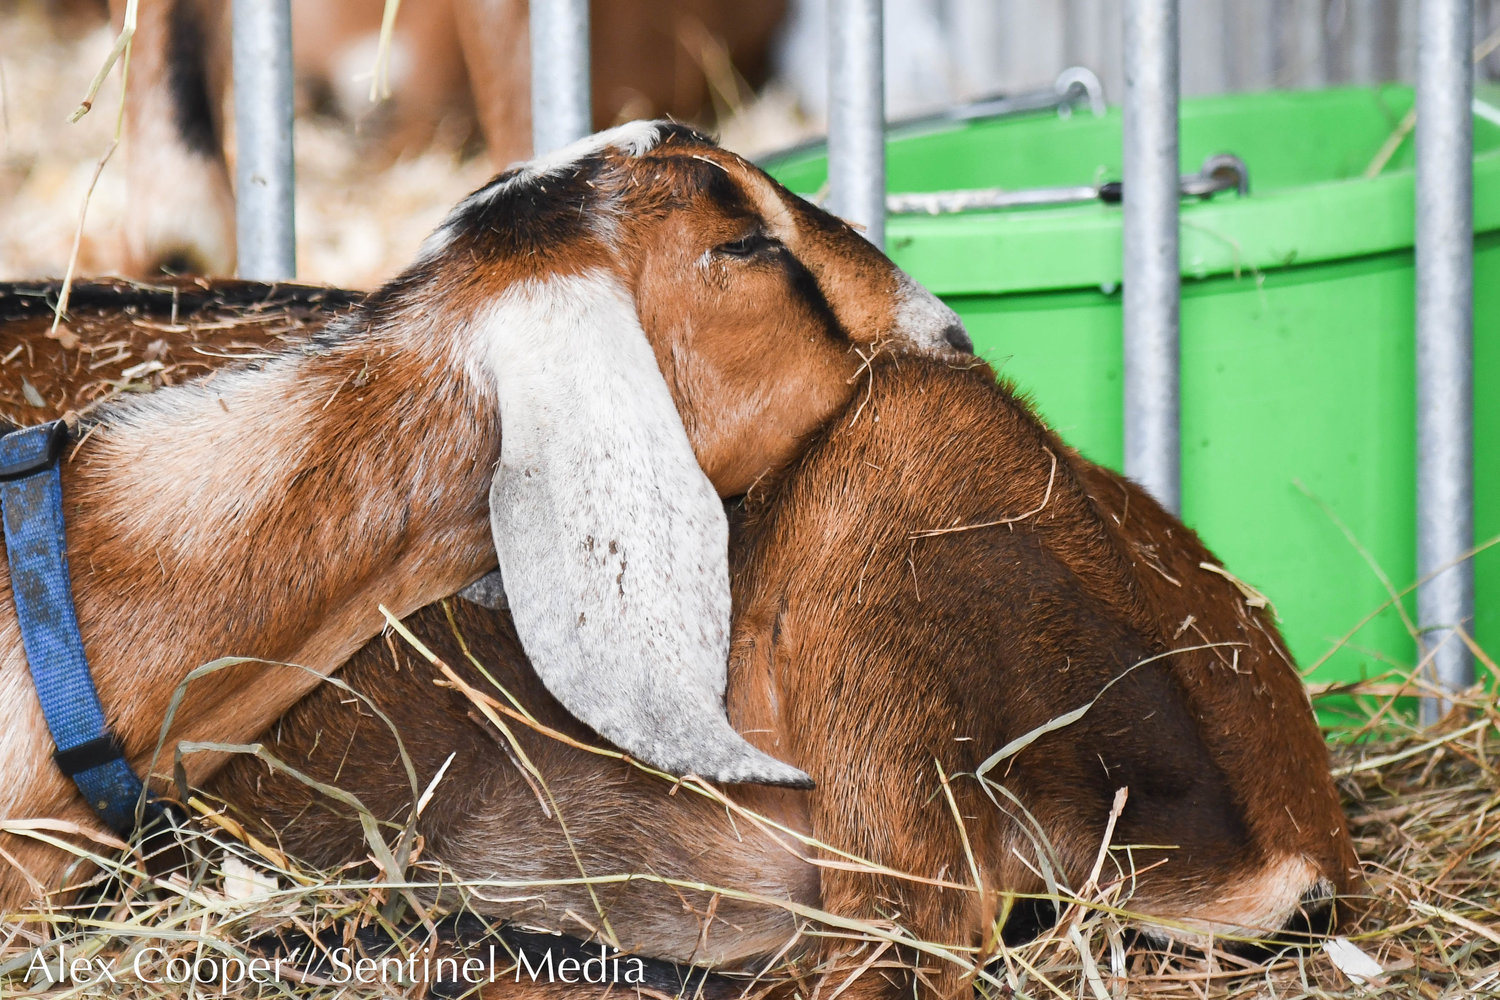 A goat takes a nap on top of another goat on Thursday at the Herkimer County Fair in Frankfort.